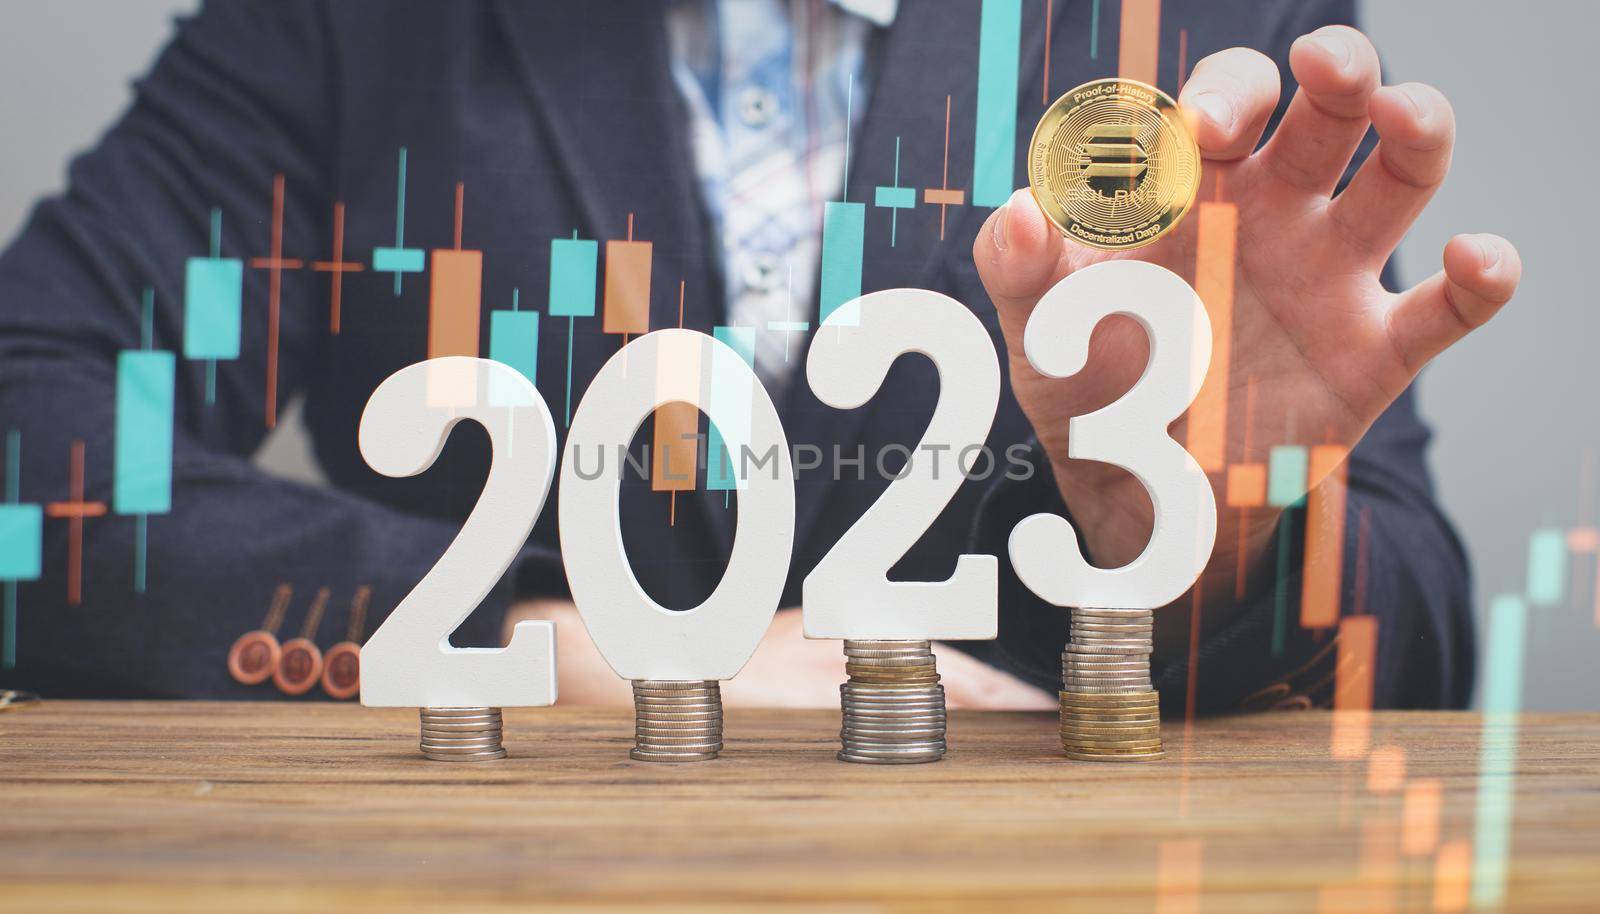 A businessman wants to invest in ethereum in 2023 to increase earnings in cryptocurrency by Maximusnd